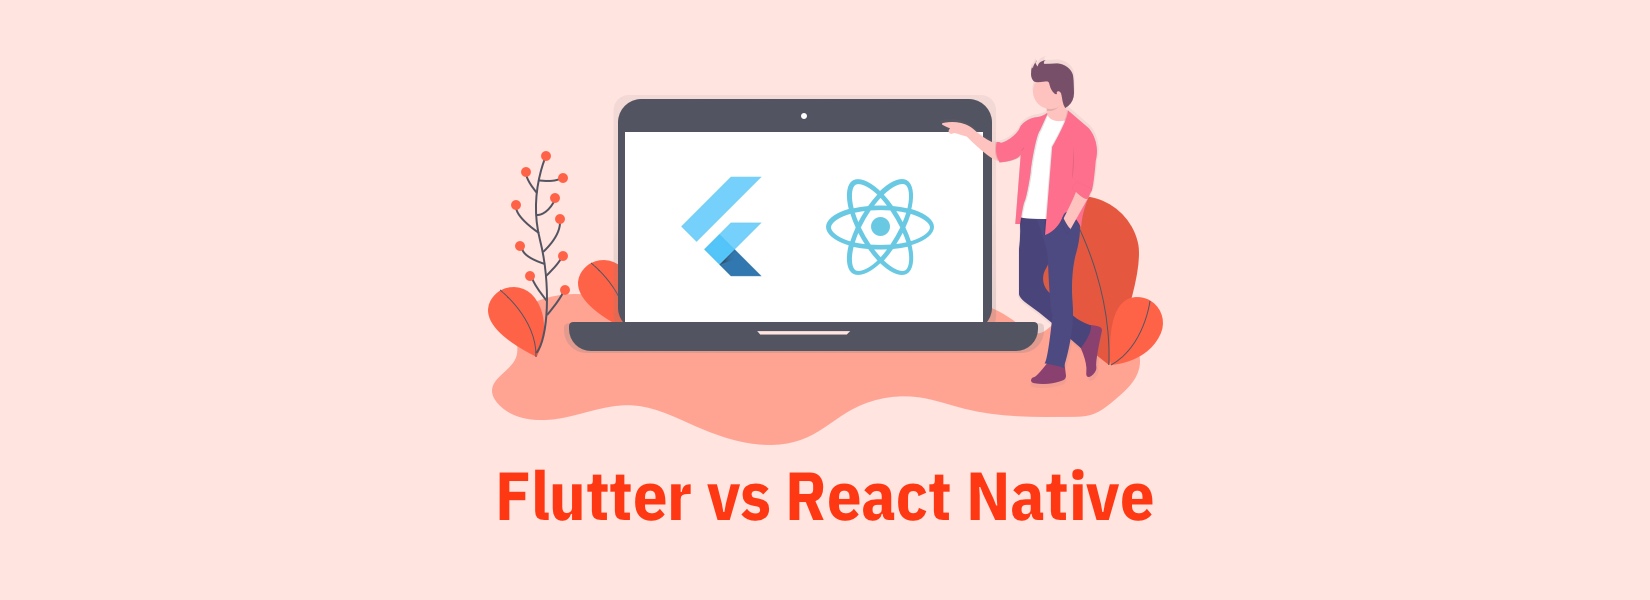 Flutter or React Native: A comparative study